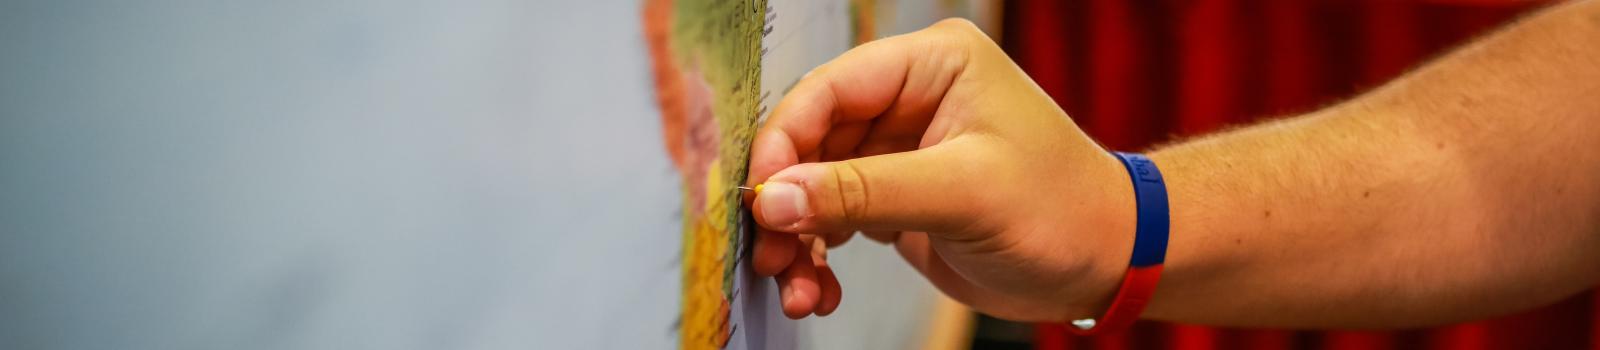 Close-up of hand putting a pin in a wall map of the world